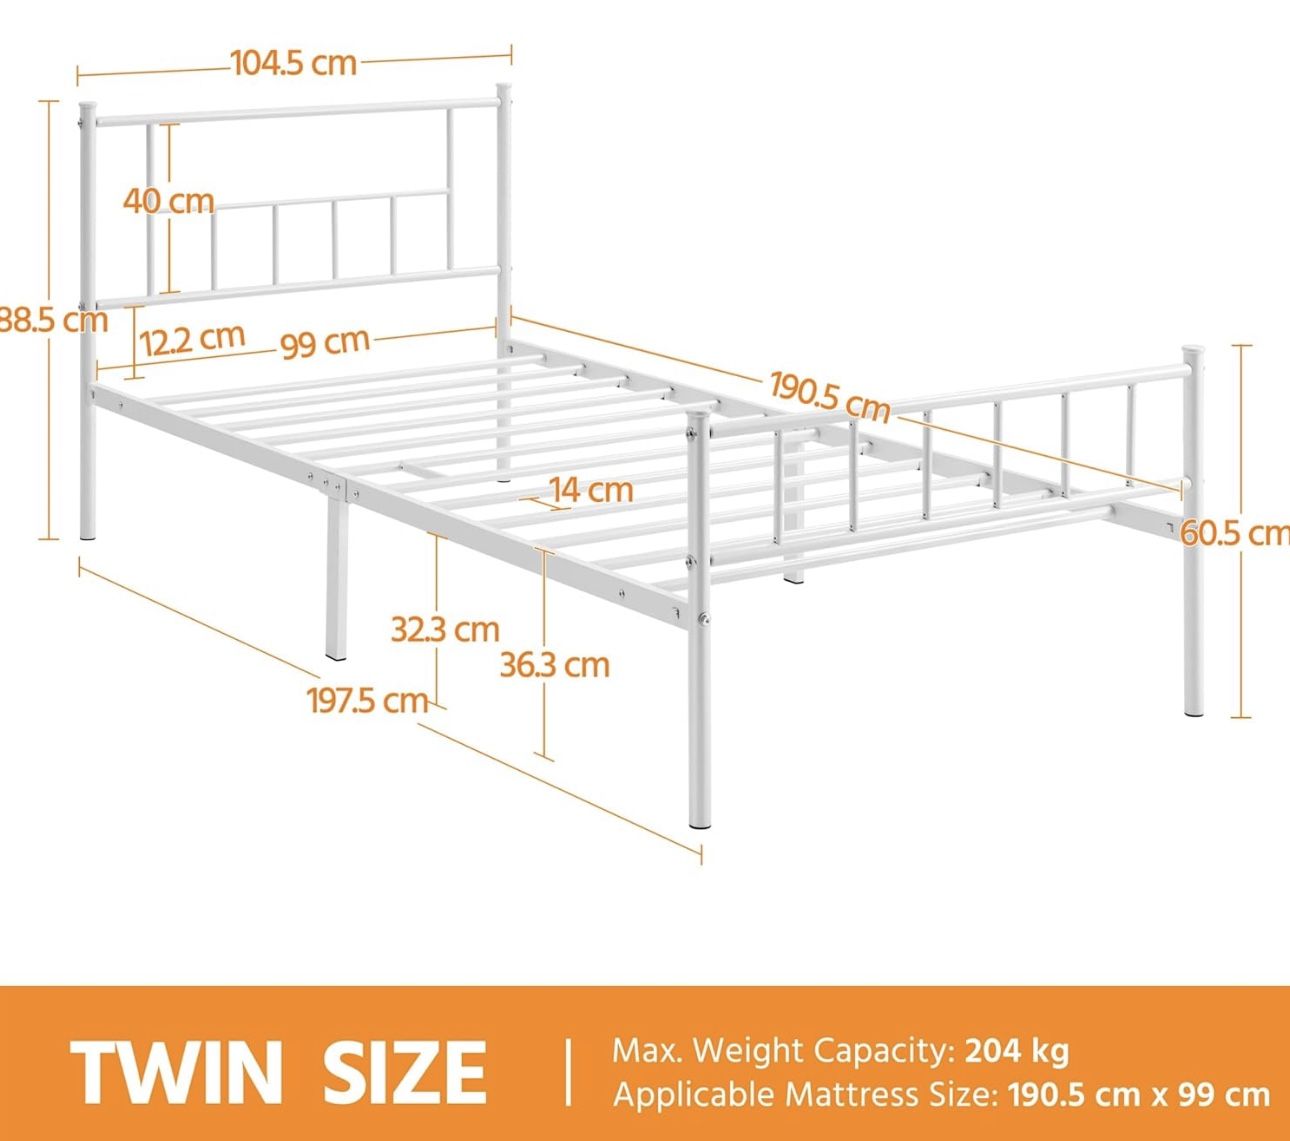 13 inch Twin Size Metal Bed Frame 